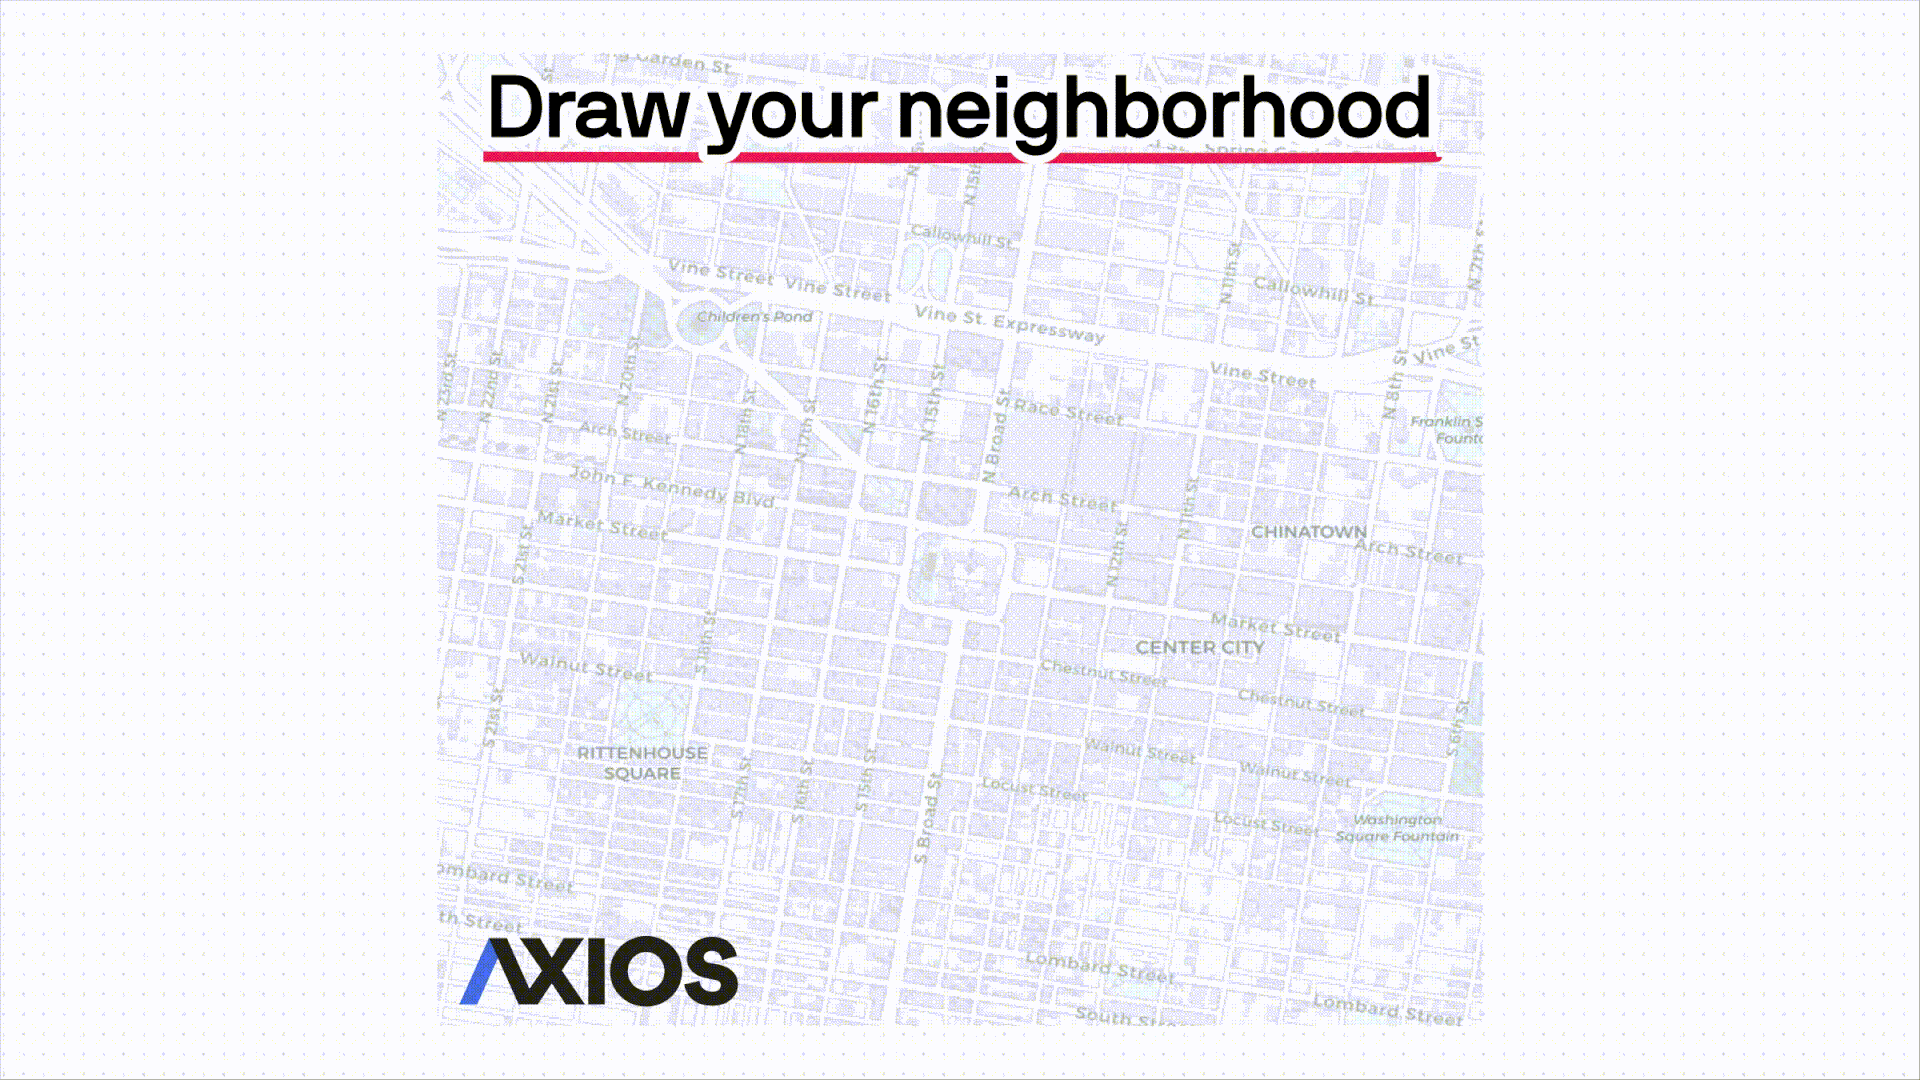 An animated image of a line being drawn around a neighborhood in red and another in gray